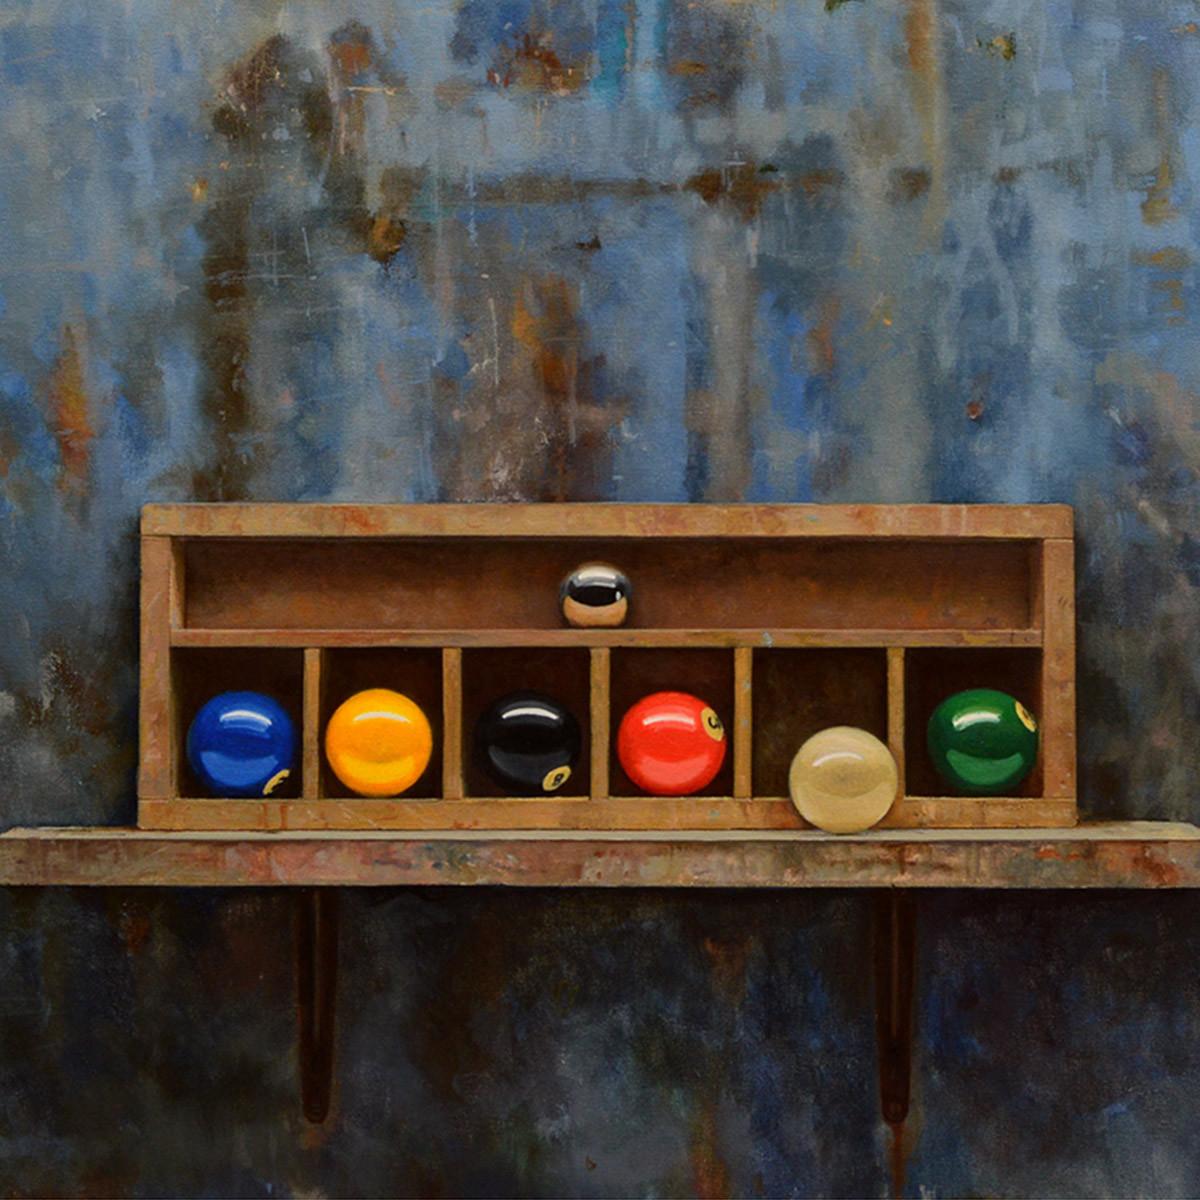 Juego de Bolas III - Oil Painting, Hyperrealism, Contemporary, Art, Luis Gomez - Brown Figurative Painting by Luis Gomez Macpherson